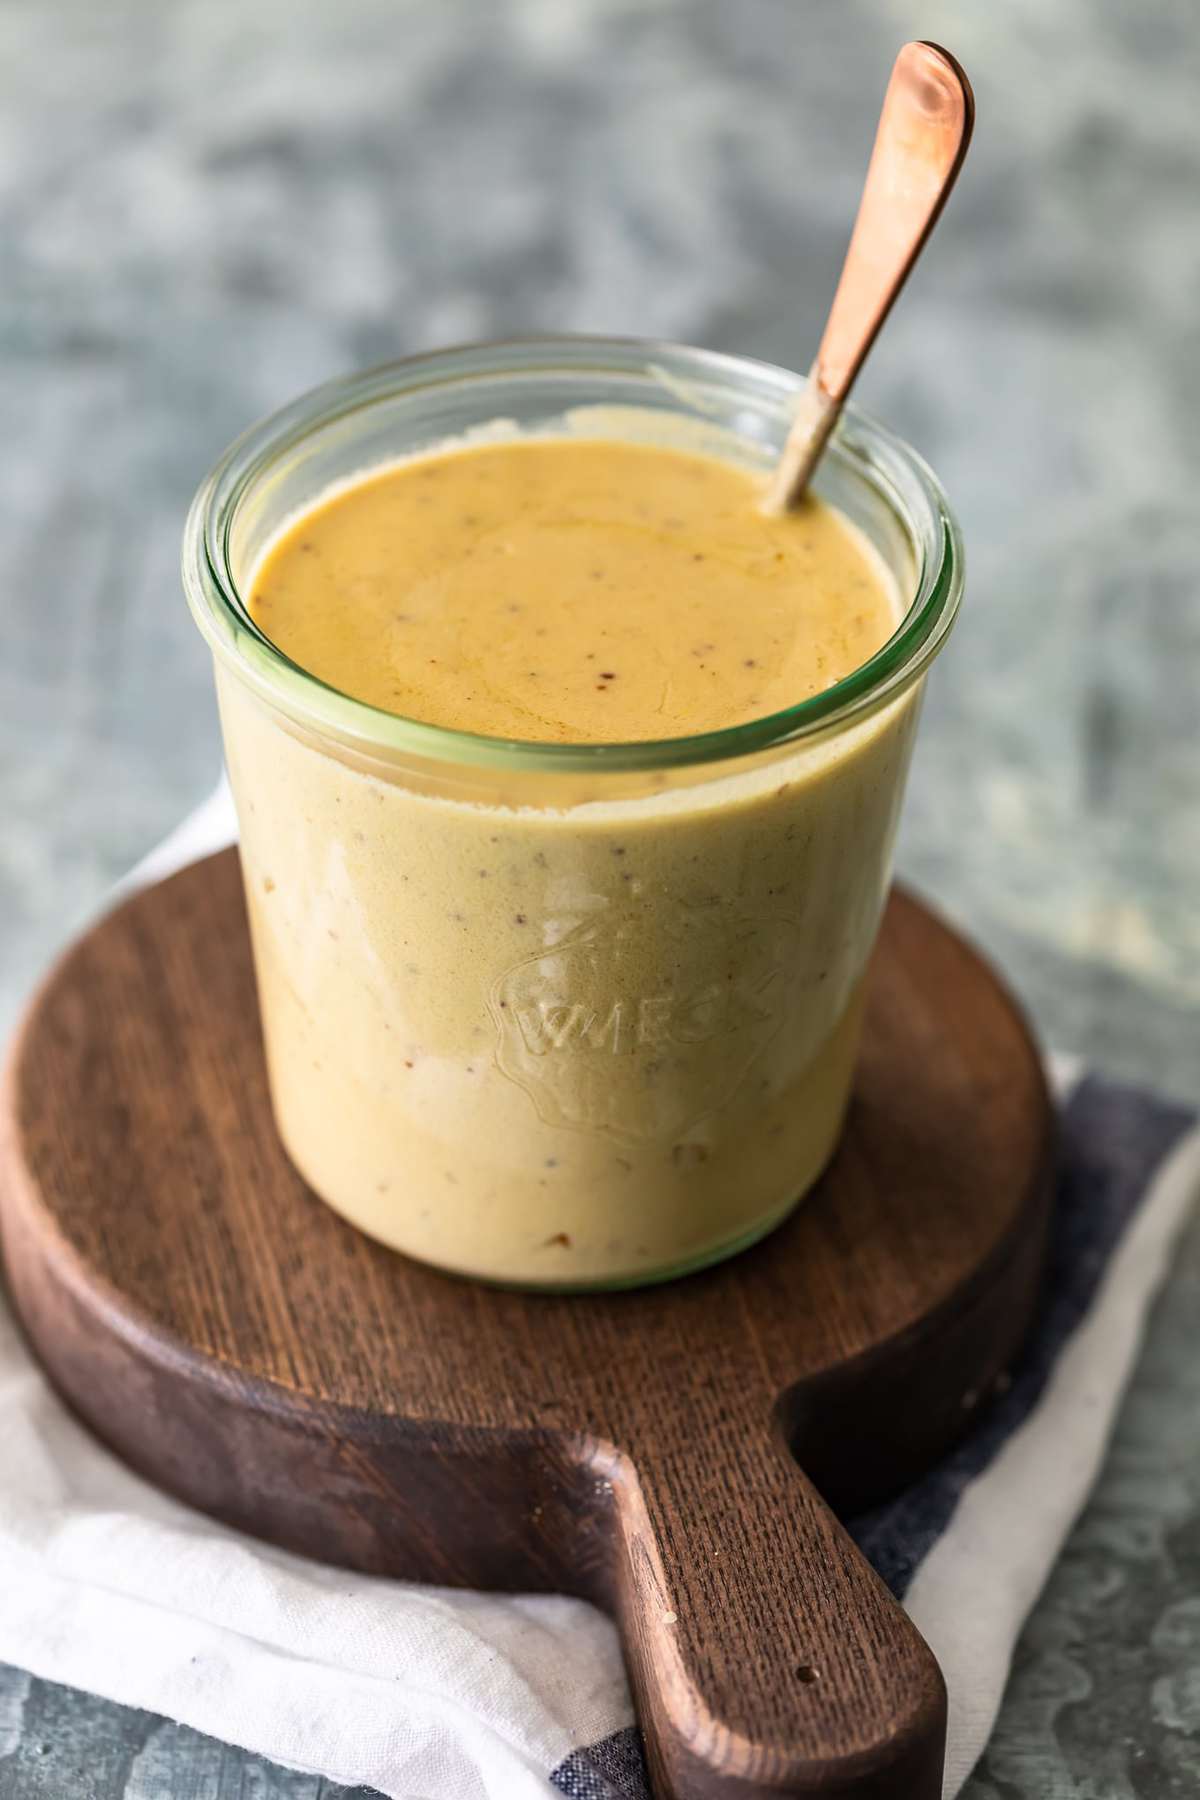 Yellow sauce in a jar with a spoon